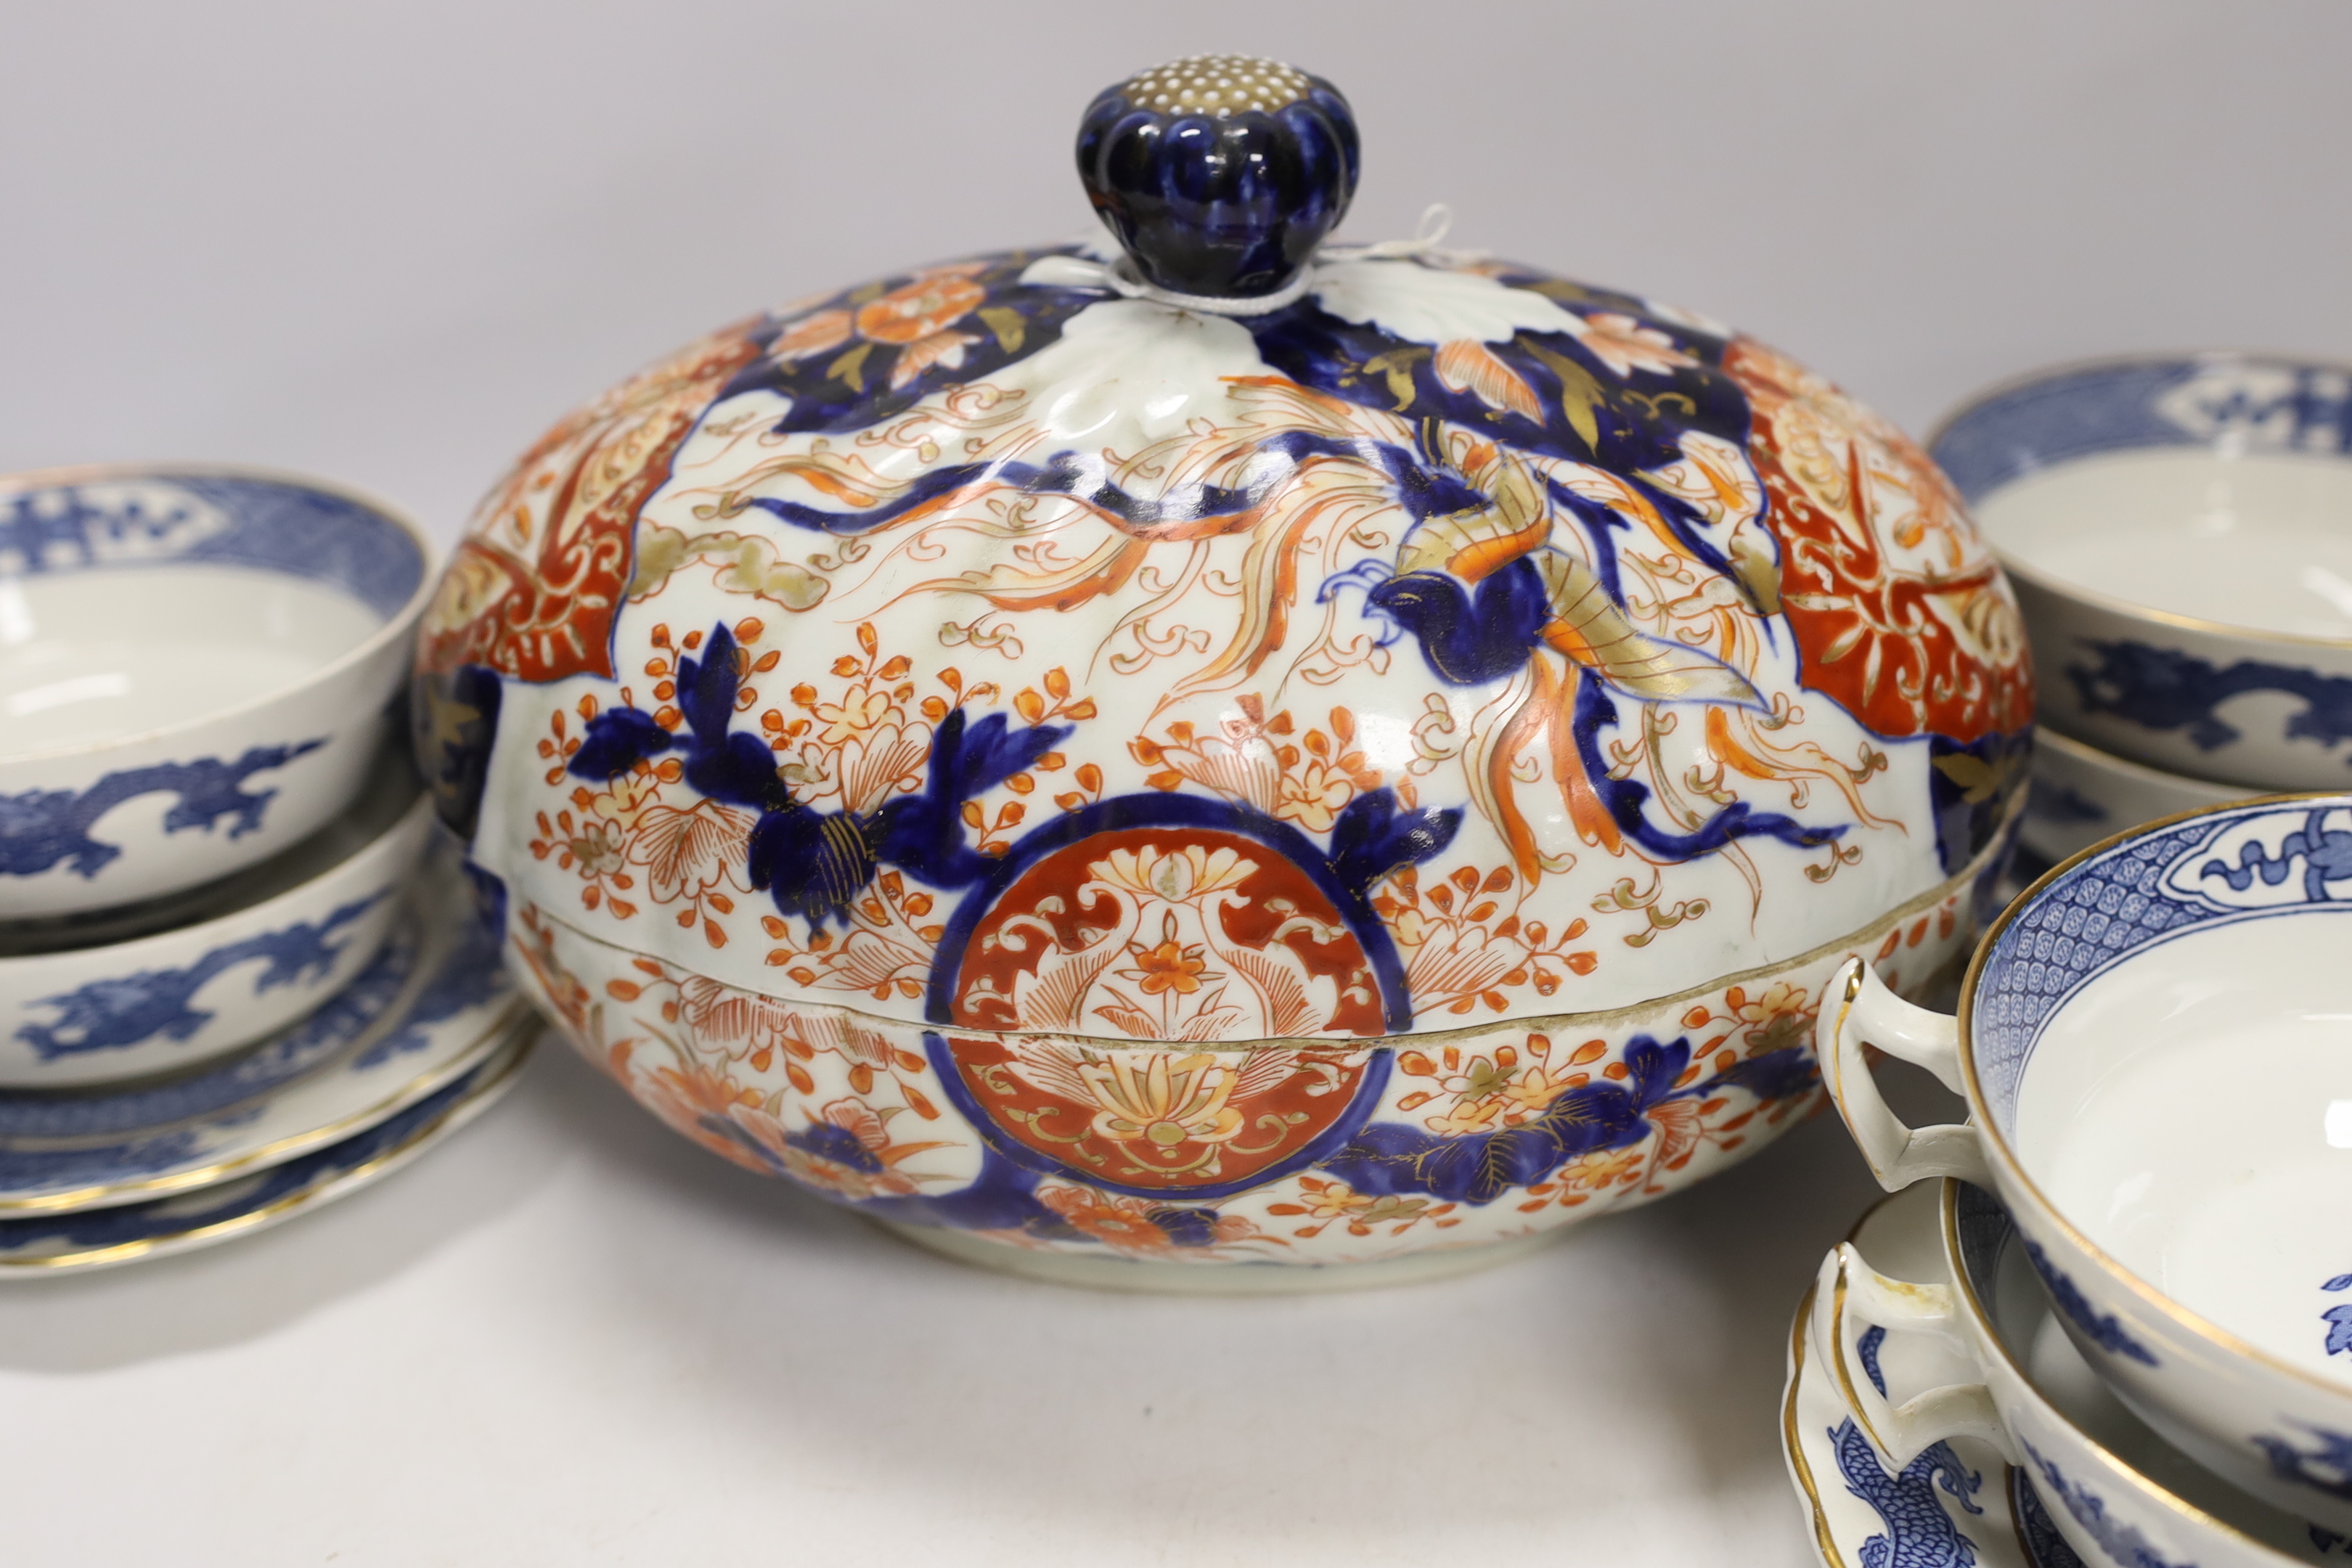 A 19th century Japanese Imari box and cover together with other Japanese, Chinese and European - Image 6 of 6